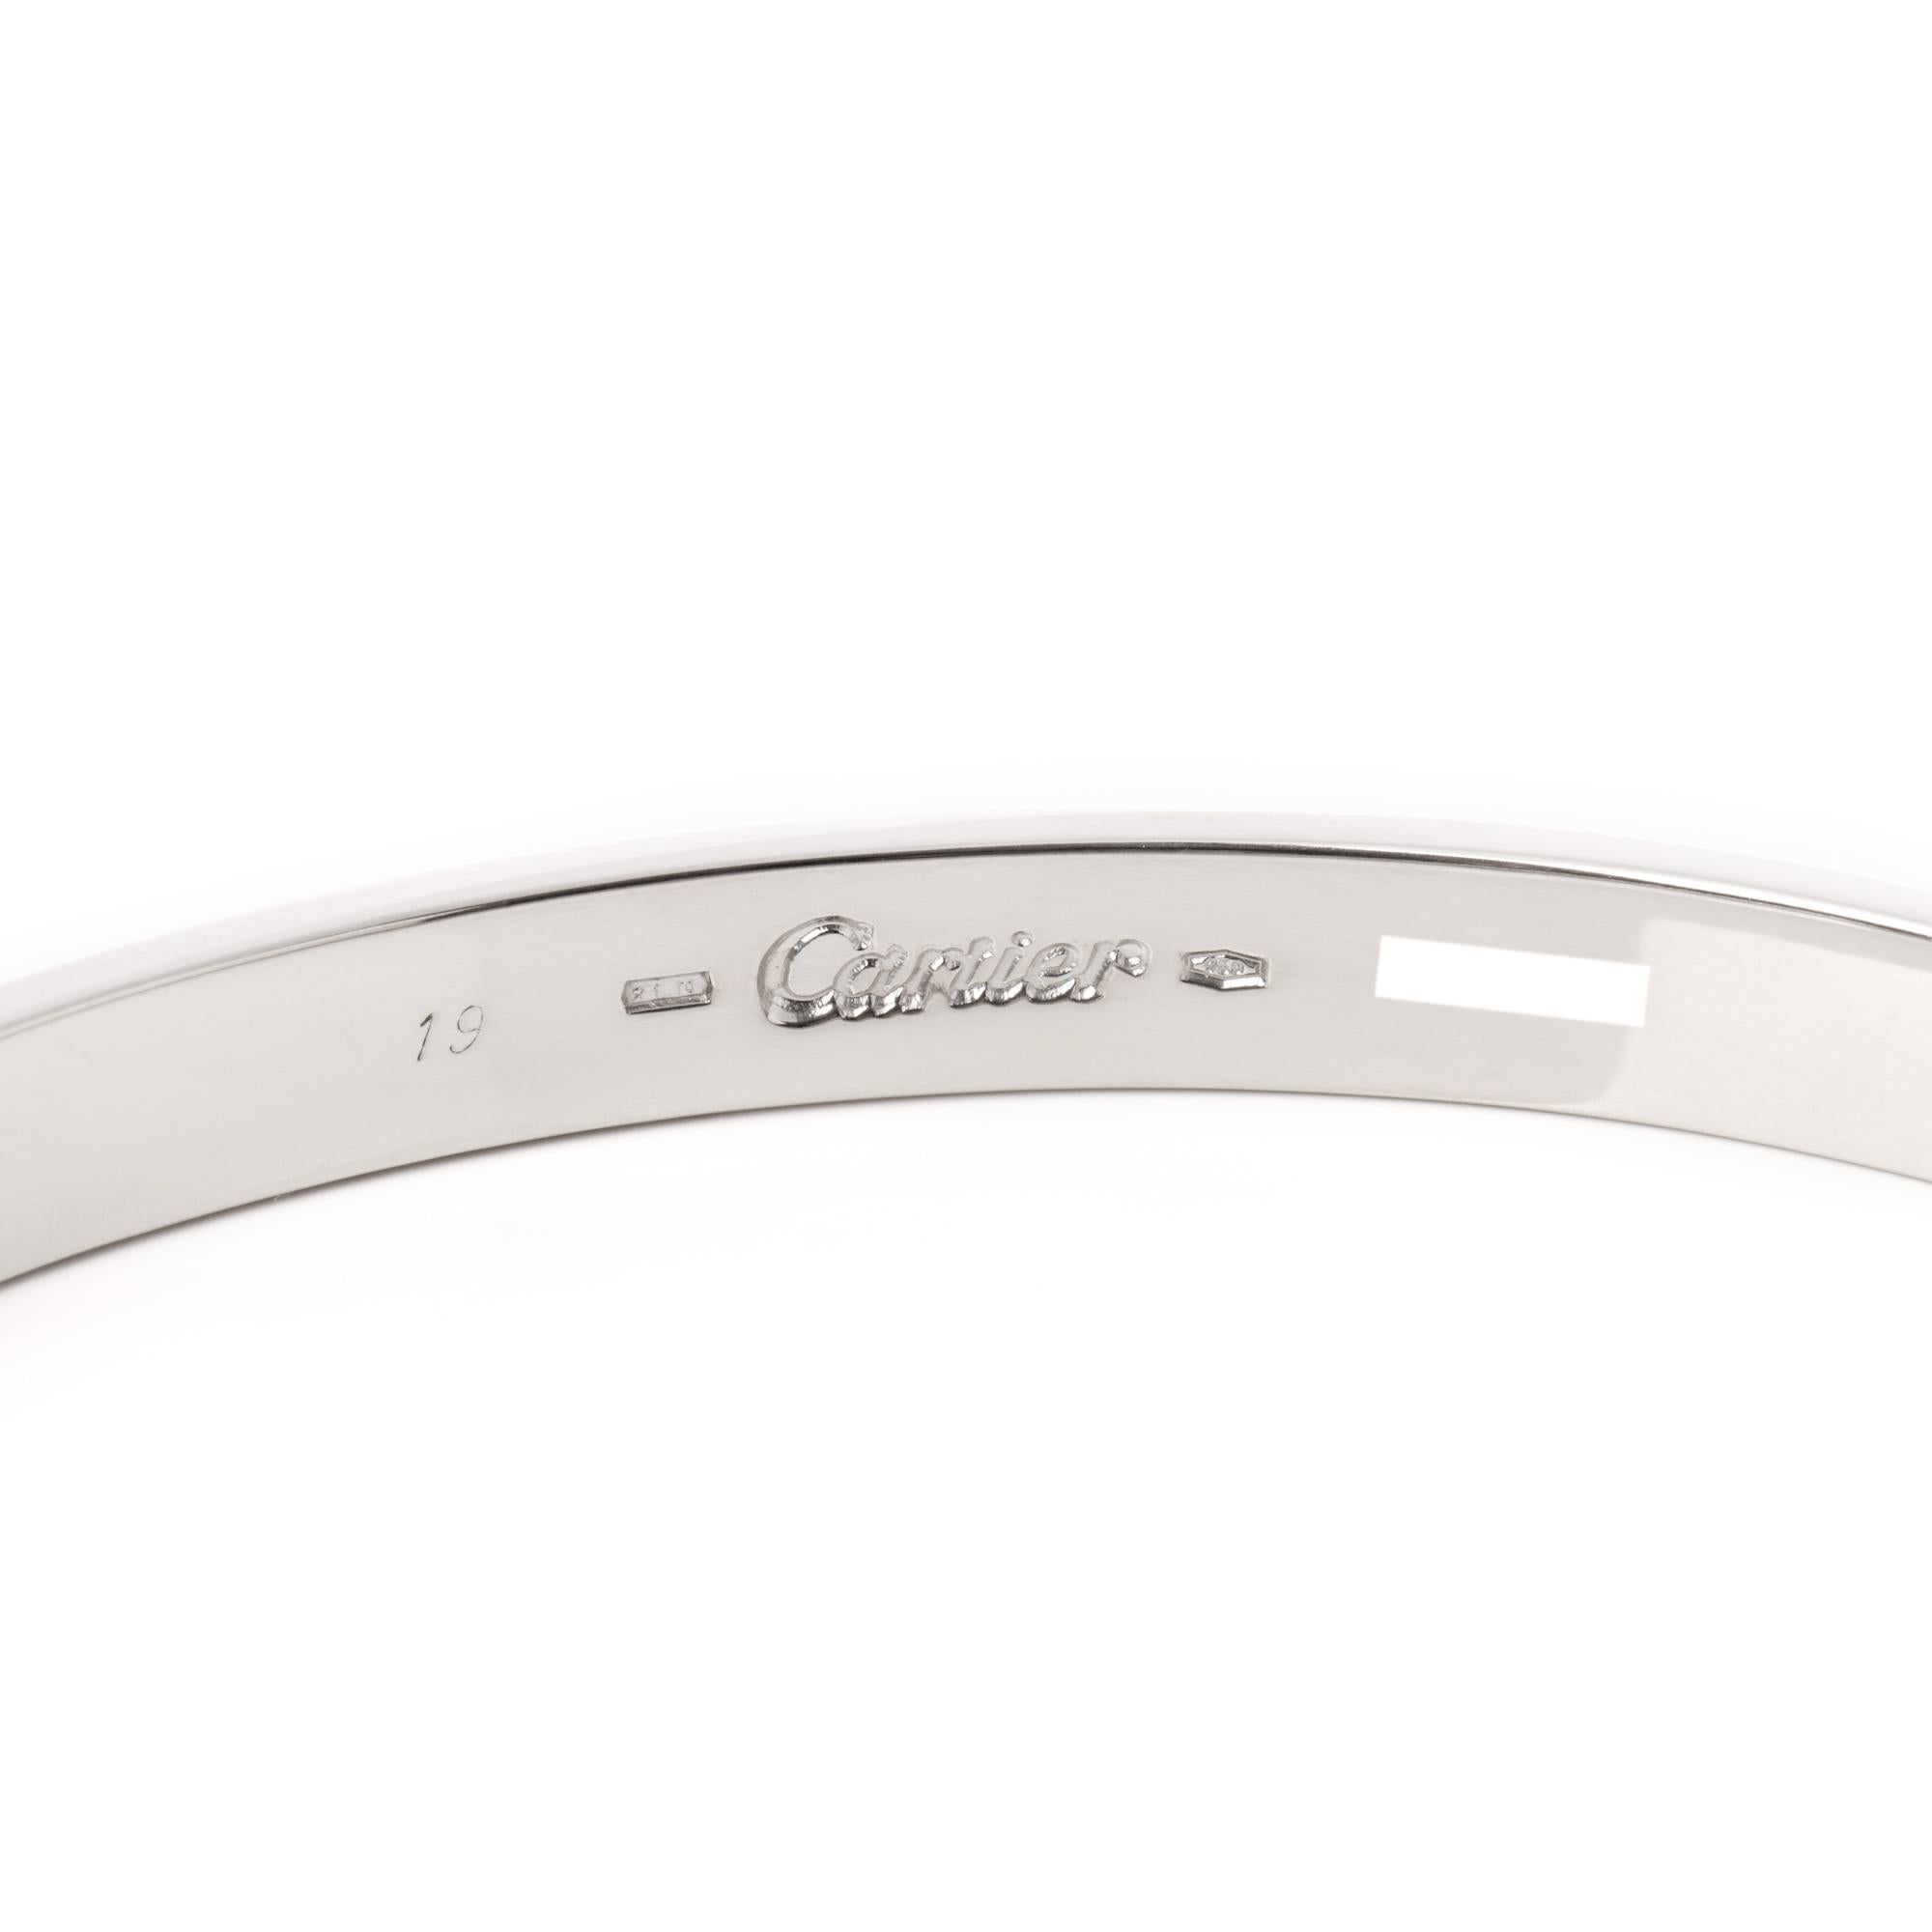 This bangle by Cartier is from their Love collection featuring Cartier's iconic screw details with original screw fastening. Accompanied by a Cartier Pouch and Service Papers. Our Xupes reference is J895 should you wish to quote